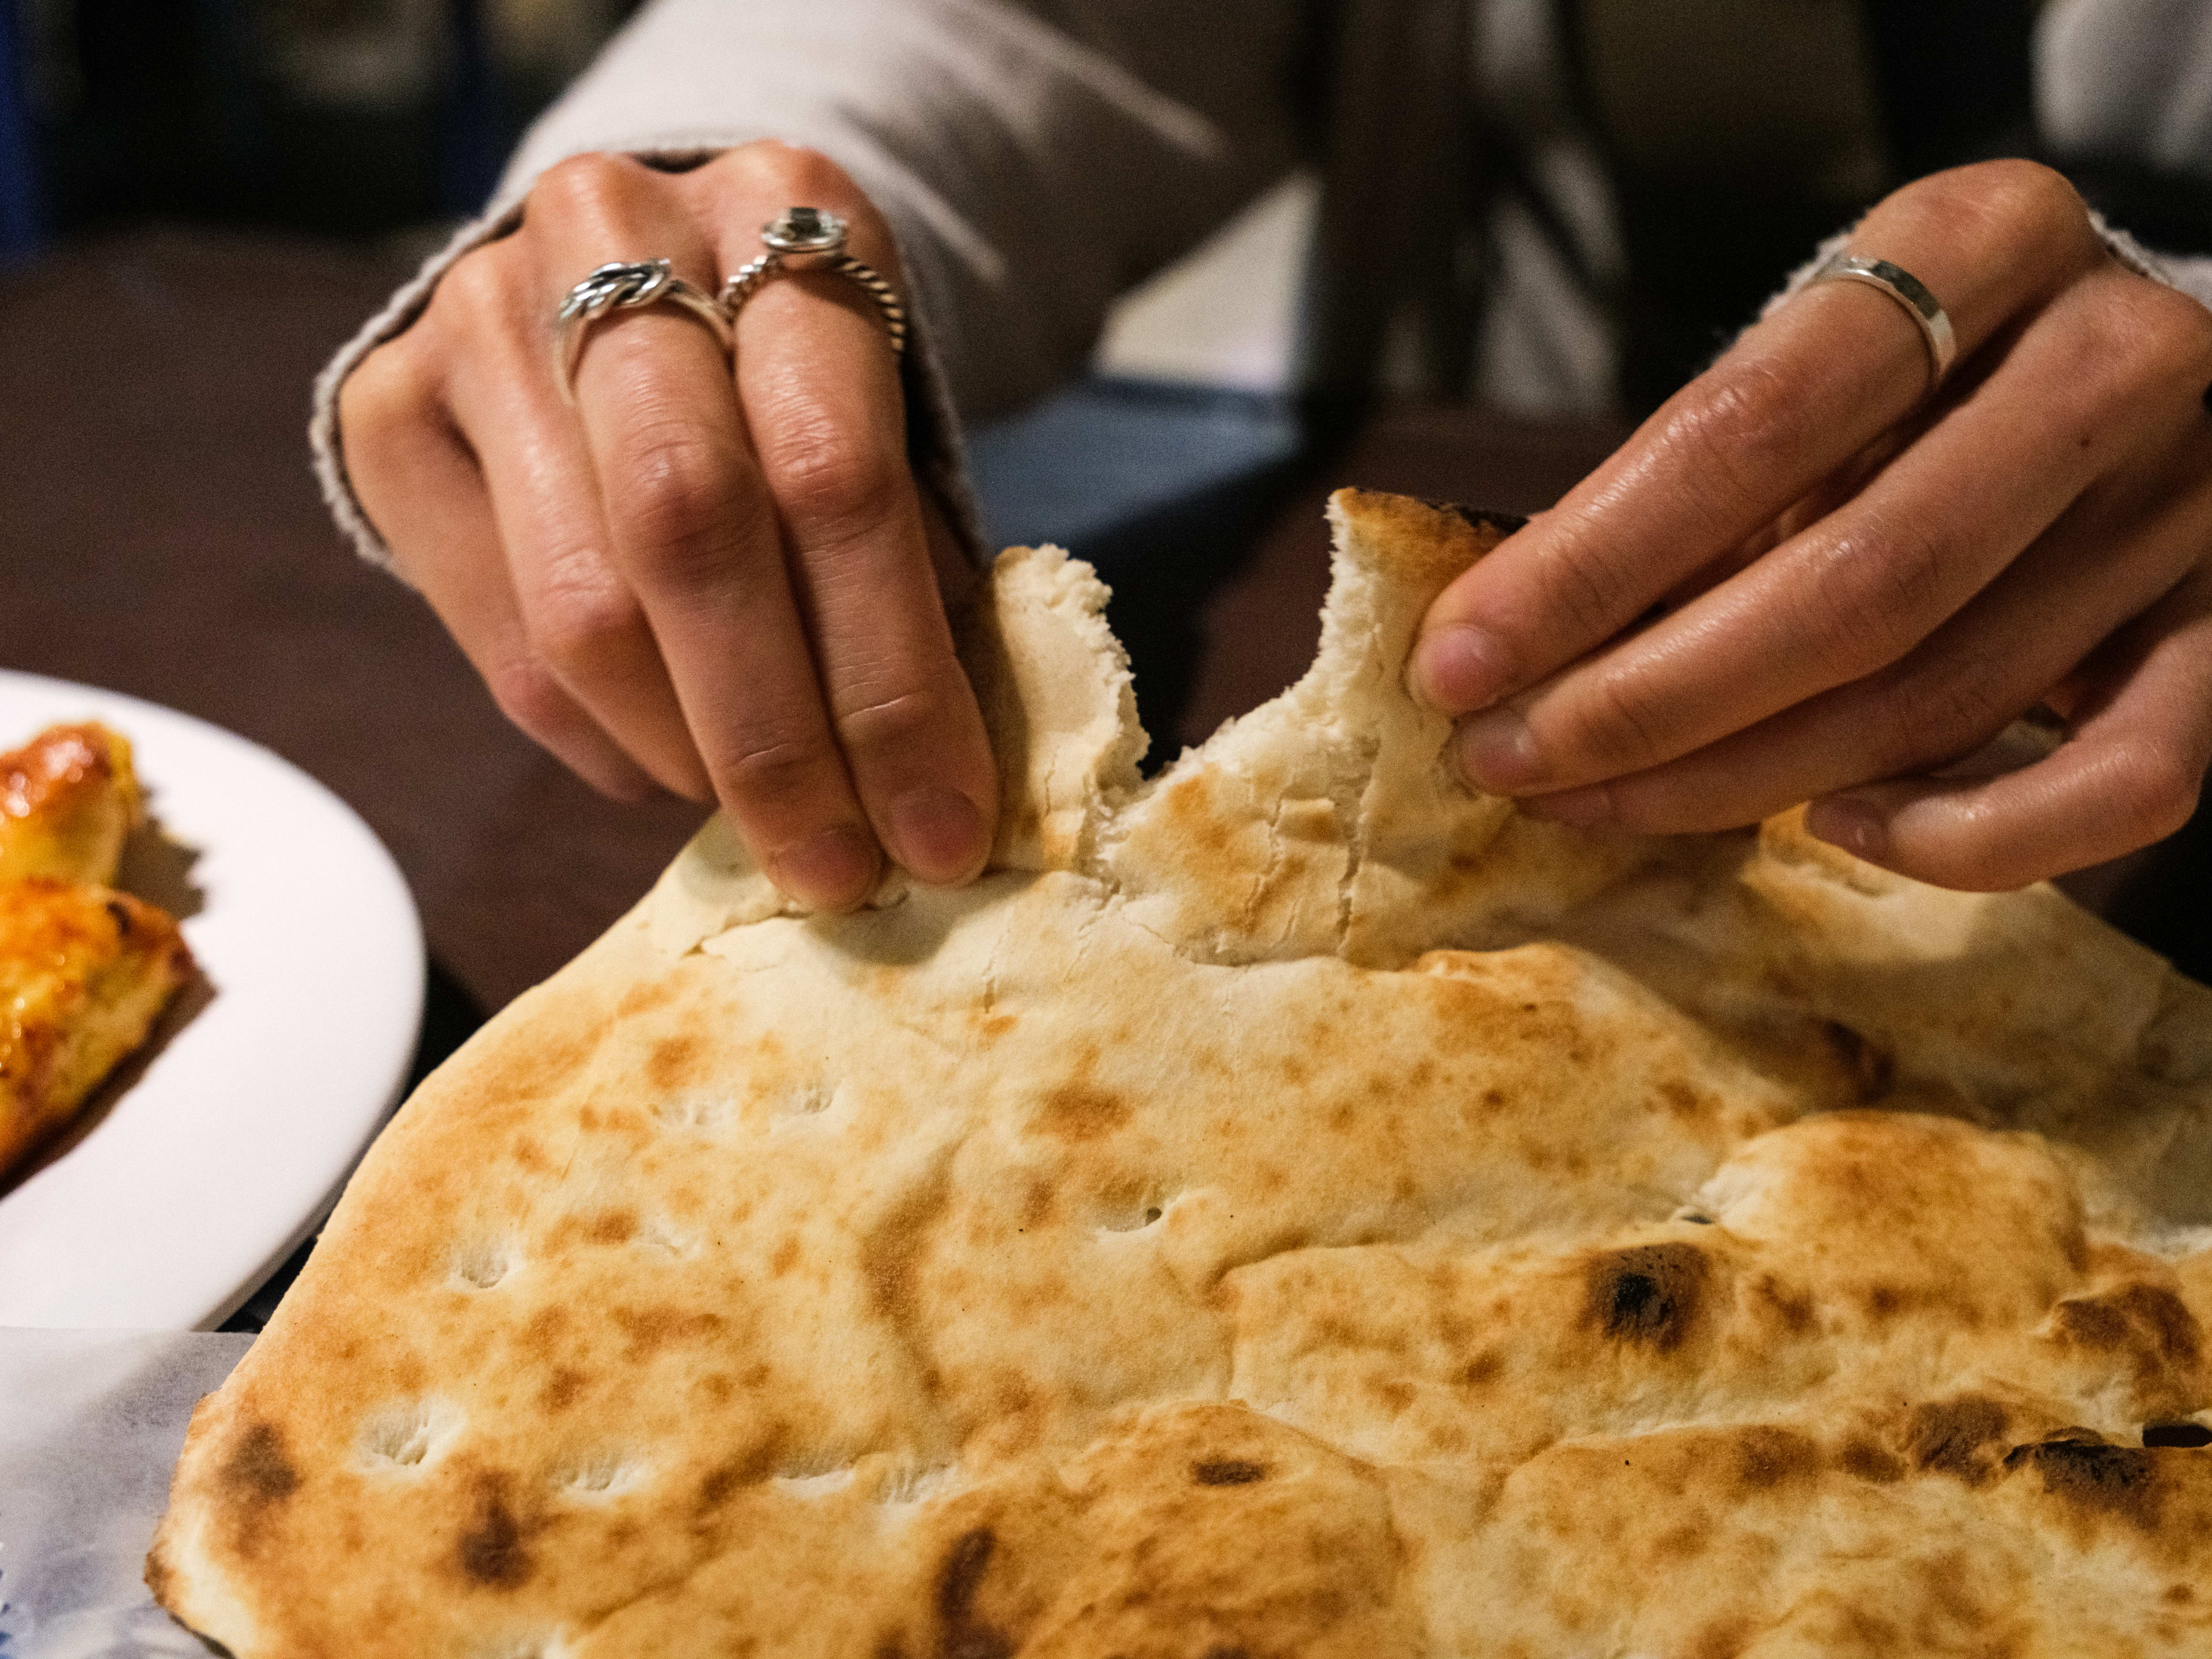 A person pulls apart bread from Ranosh Cafe.